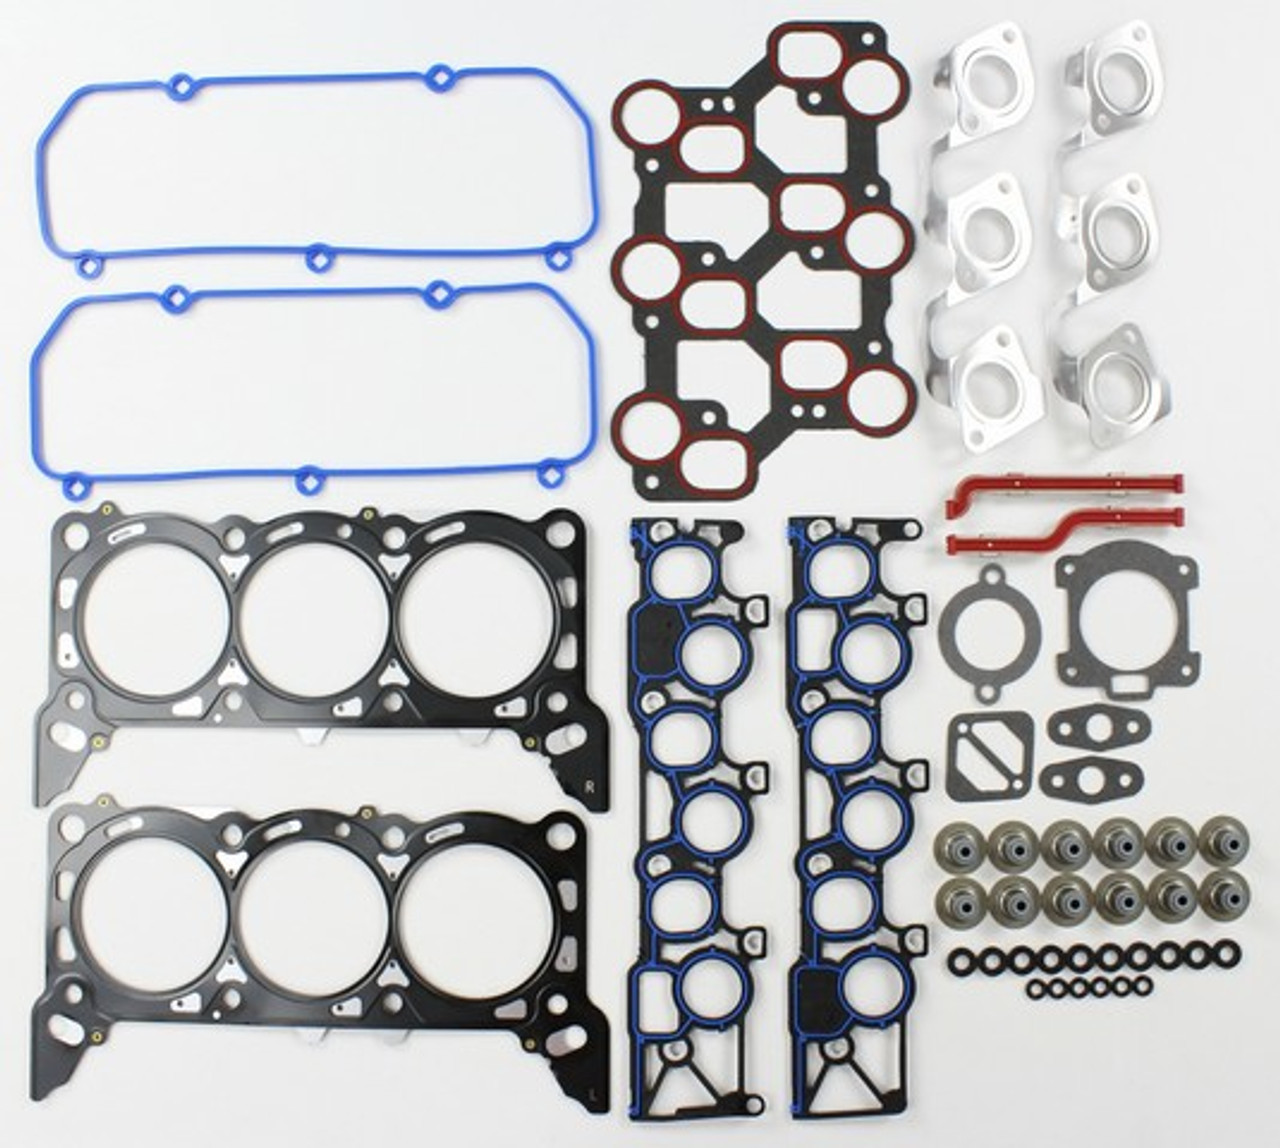 Head Gasket Set 3.8L 2003 Ford Mustang - HGS4120.17